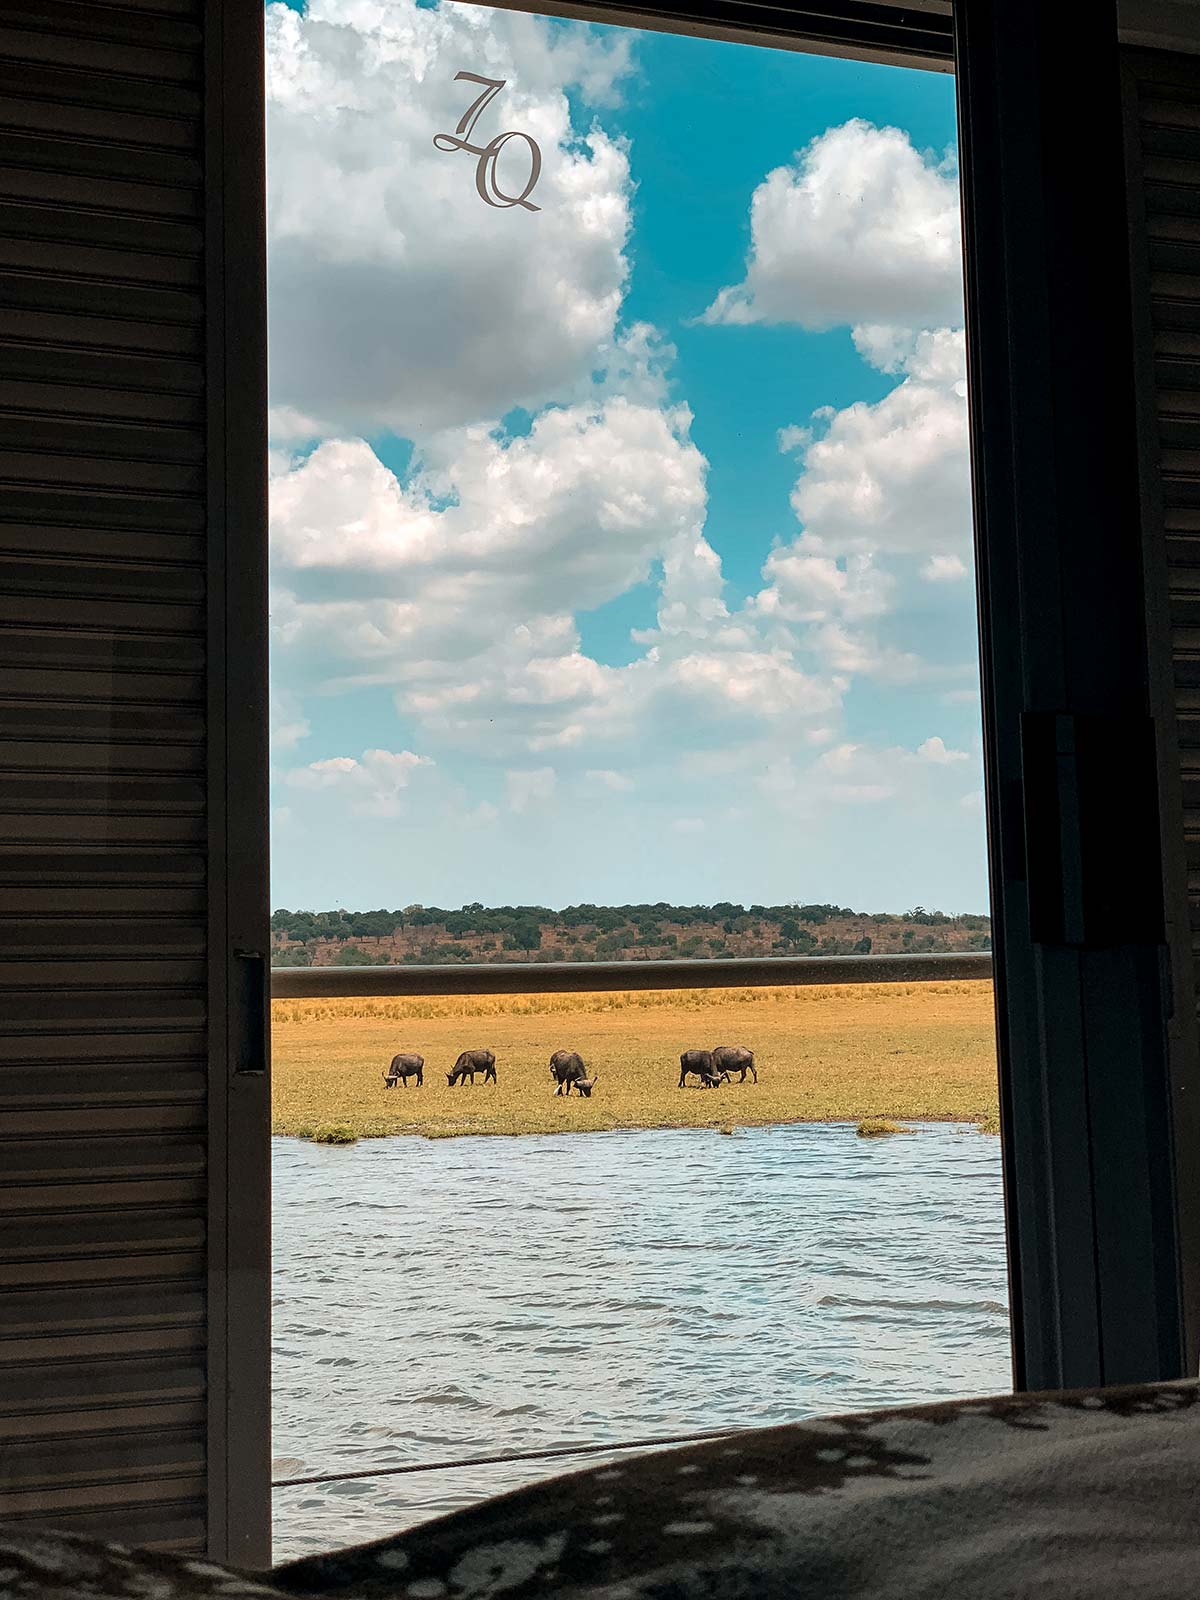 Wild animals outside the window of Zambezi Queen in Botswana, Africa. The hunt for 100 trillion dollars